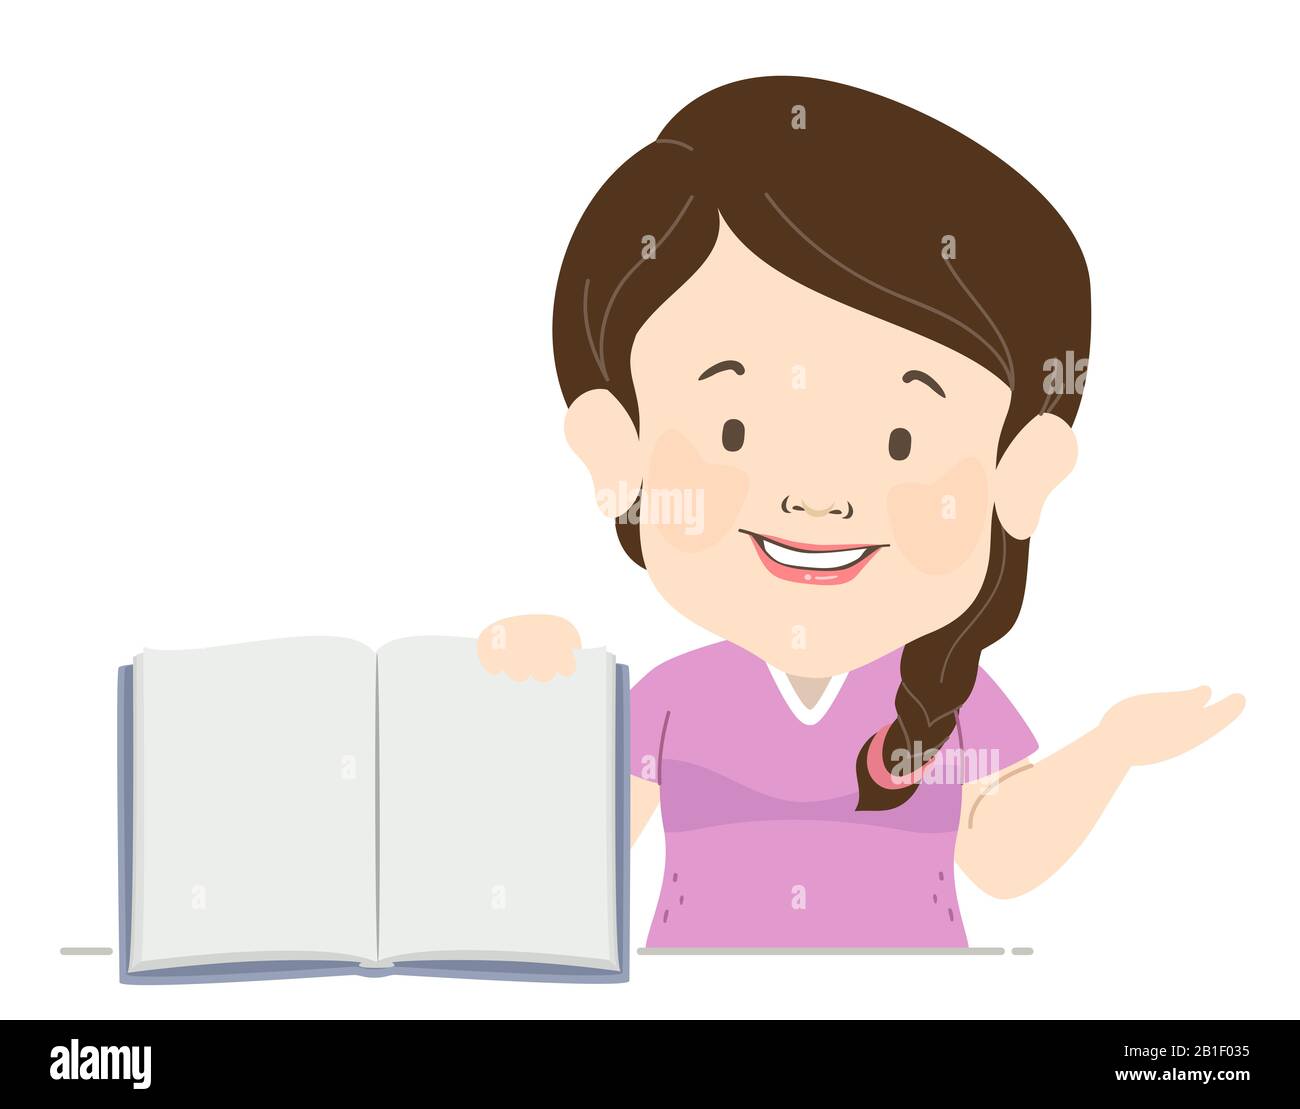 Illustration of a Girl with Dwarfism Speaking with an Open Book Stock Photo